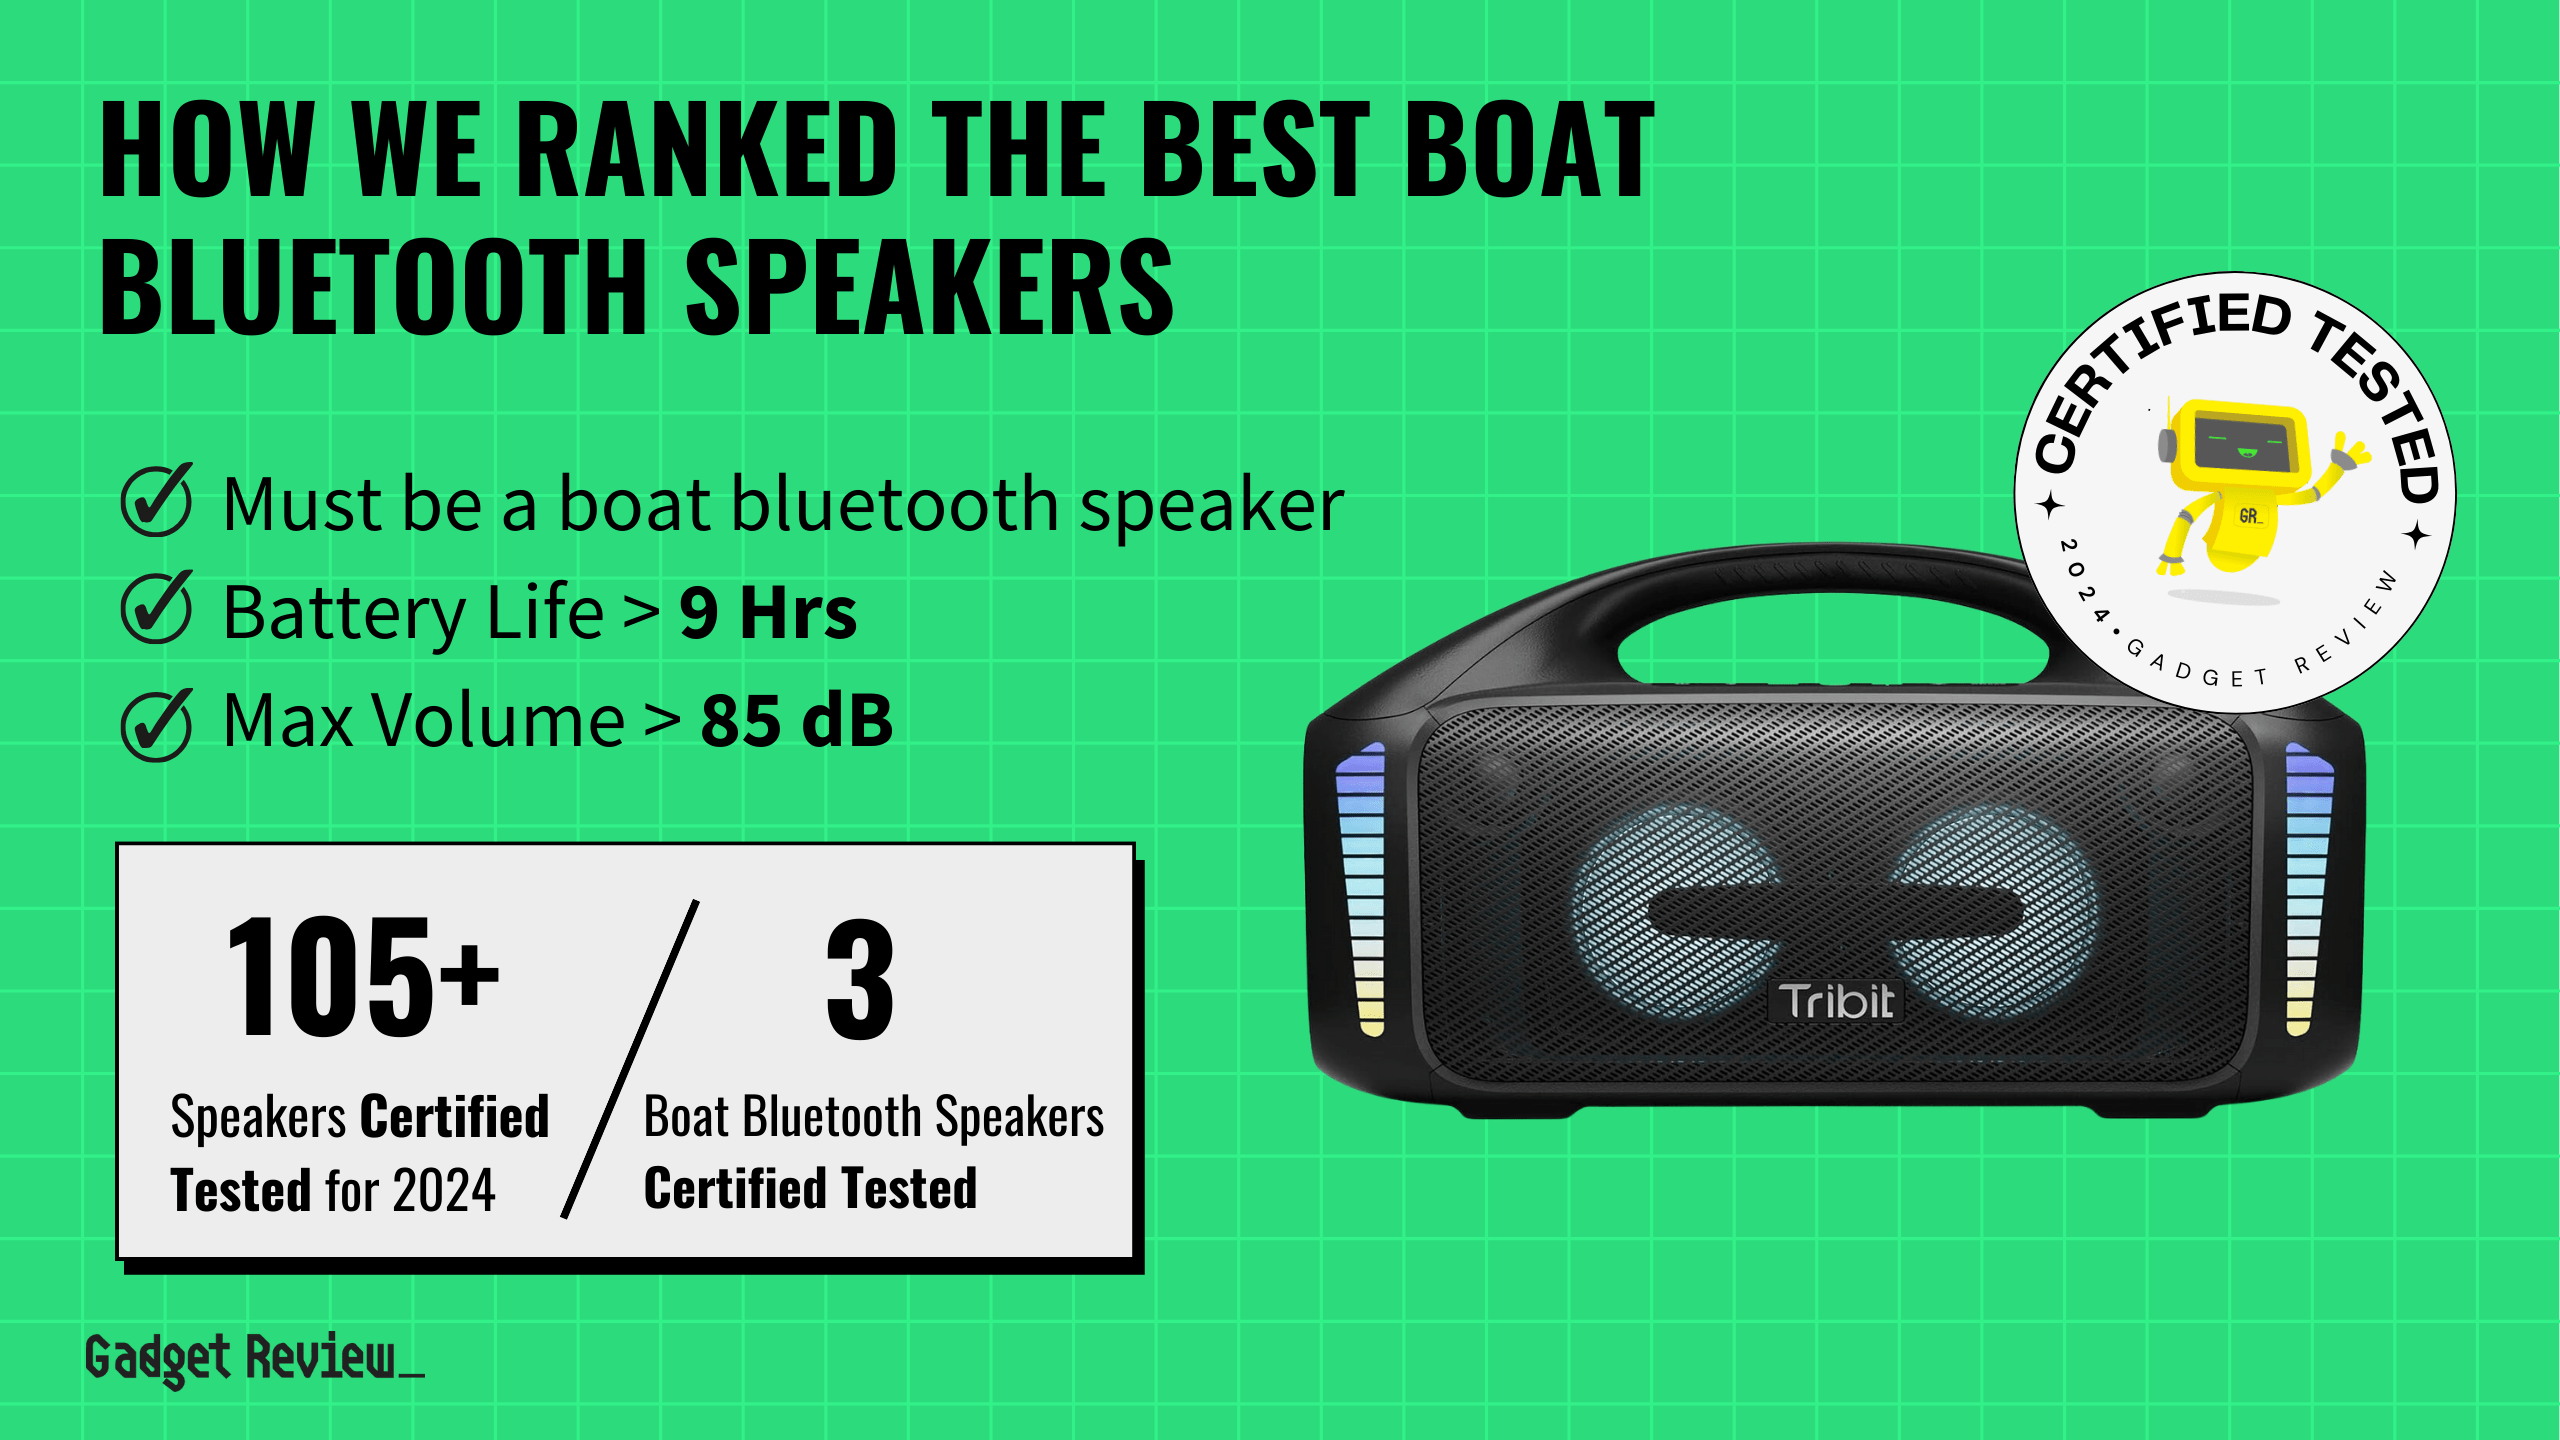 What Are The Top 3 Boat Bluetooth Speakers?